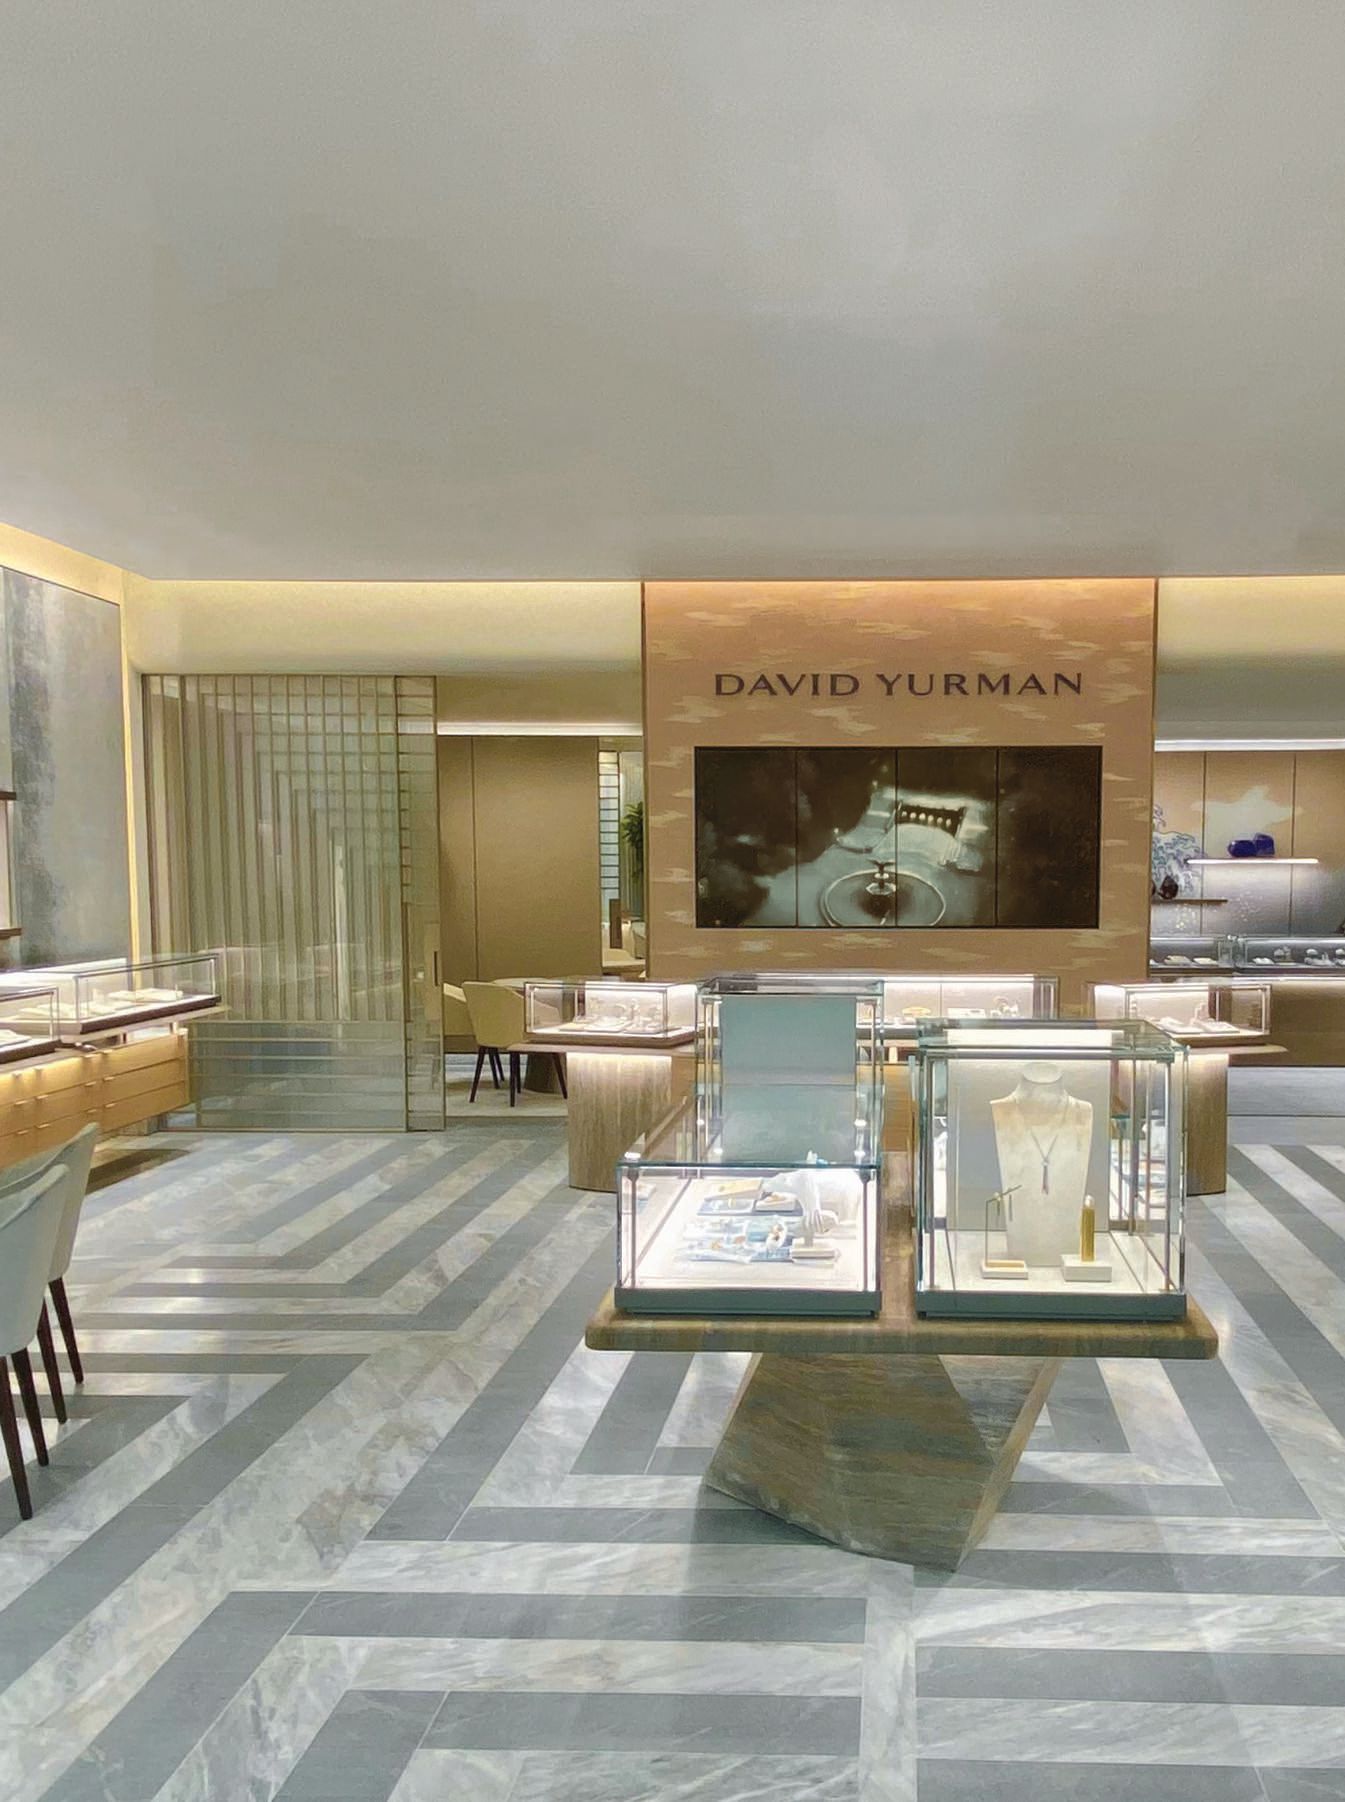 Get the ultimate shopping experience at the new David Yurman store at Scottsdale Fashion Square. PHOTO COURTESY OF BRAND